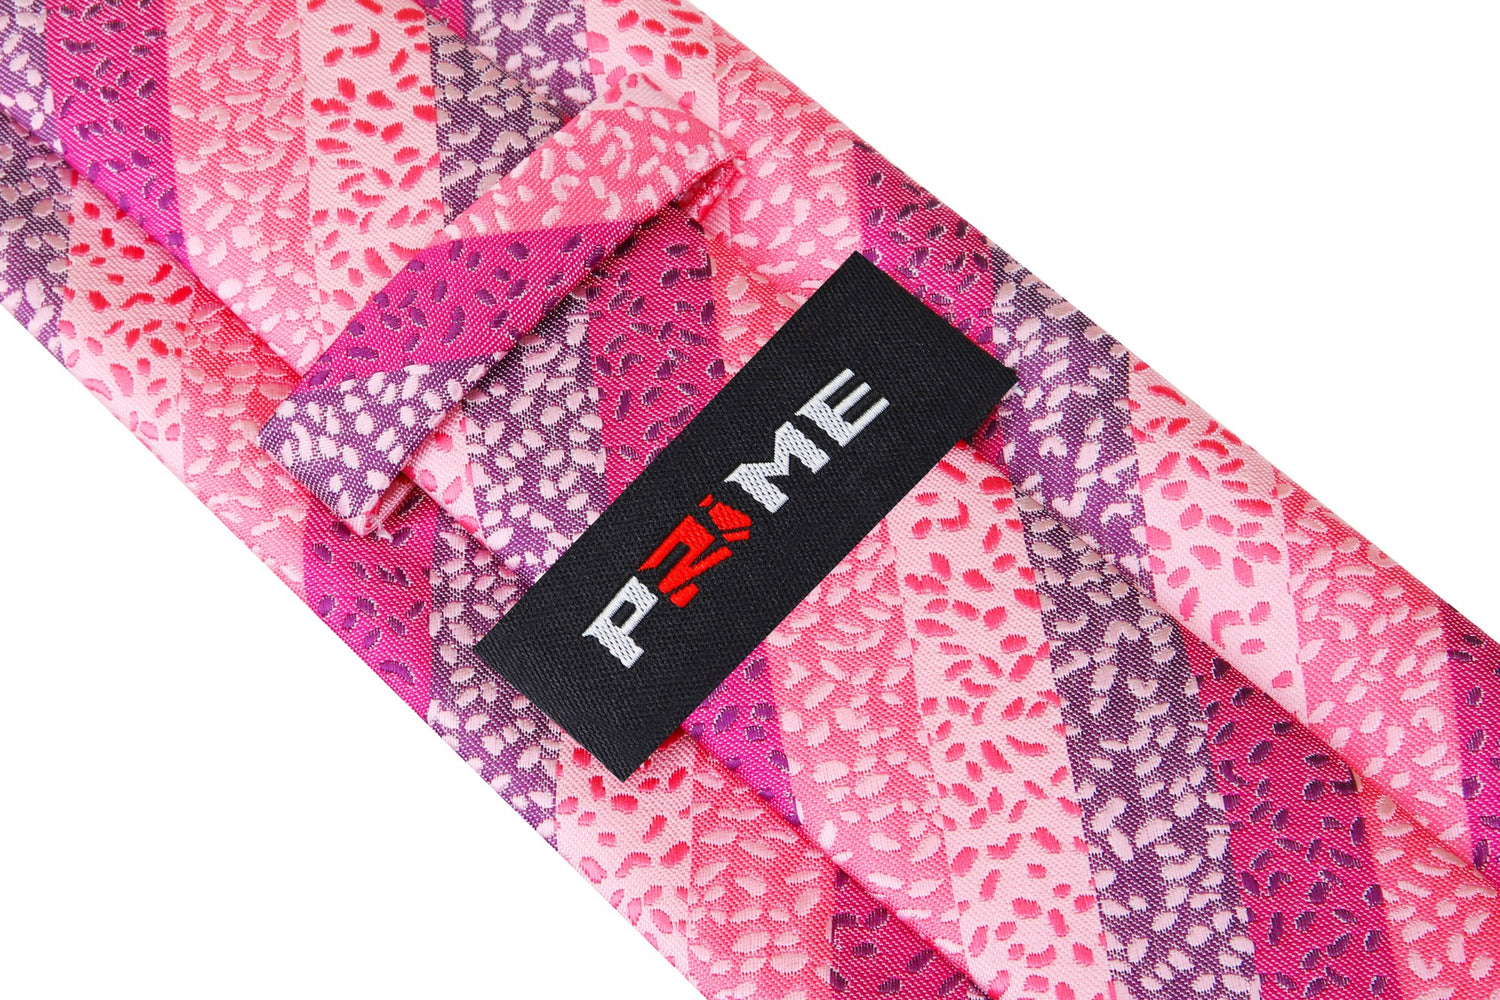 Shades of Pink with stripes and texture silk tie Keep